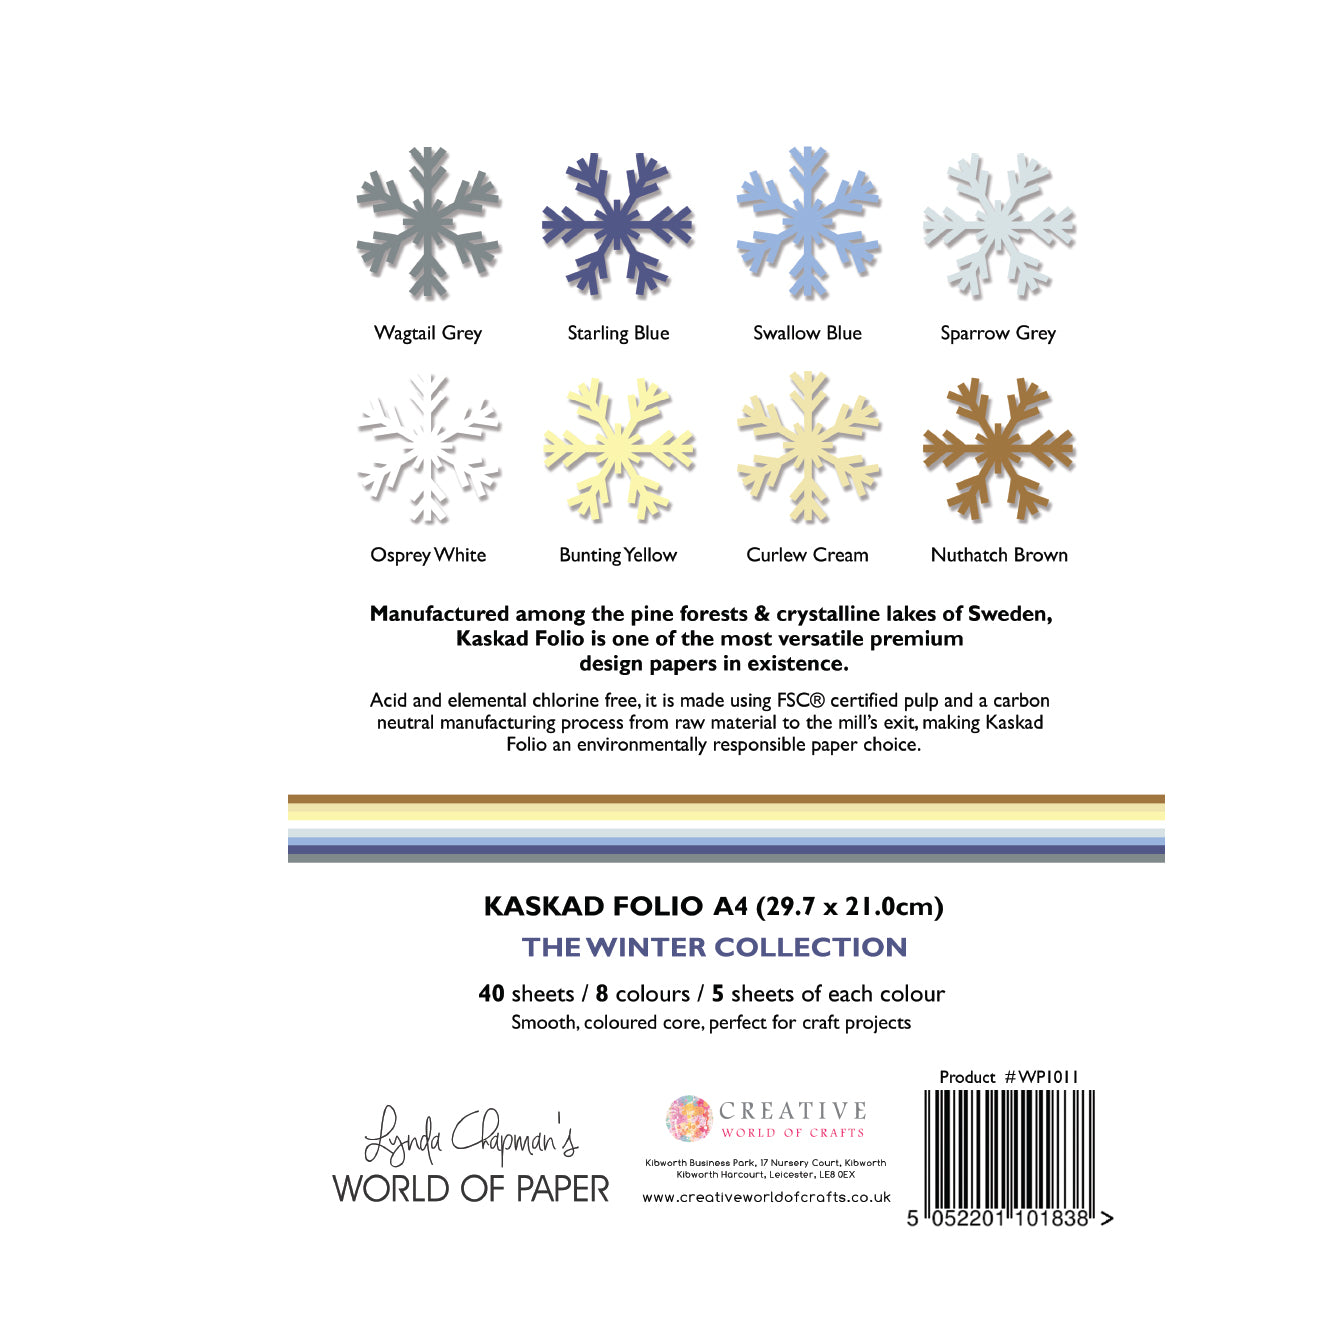 Kaskad Folio Winter Collection A4 225gsm Coloured Core Cardstock 40 sheets